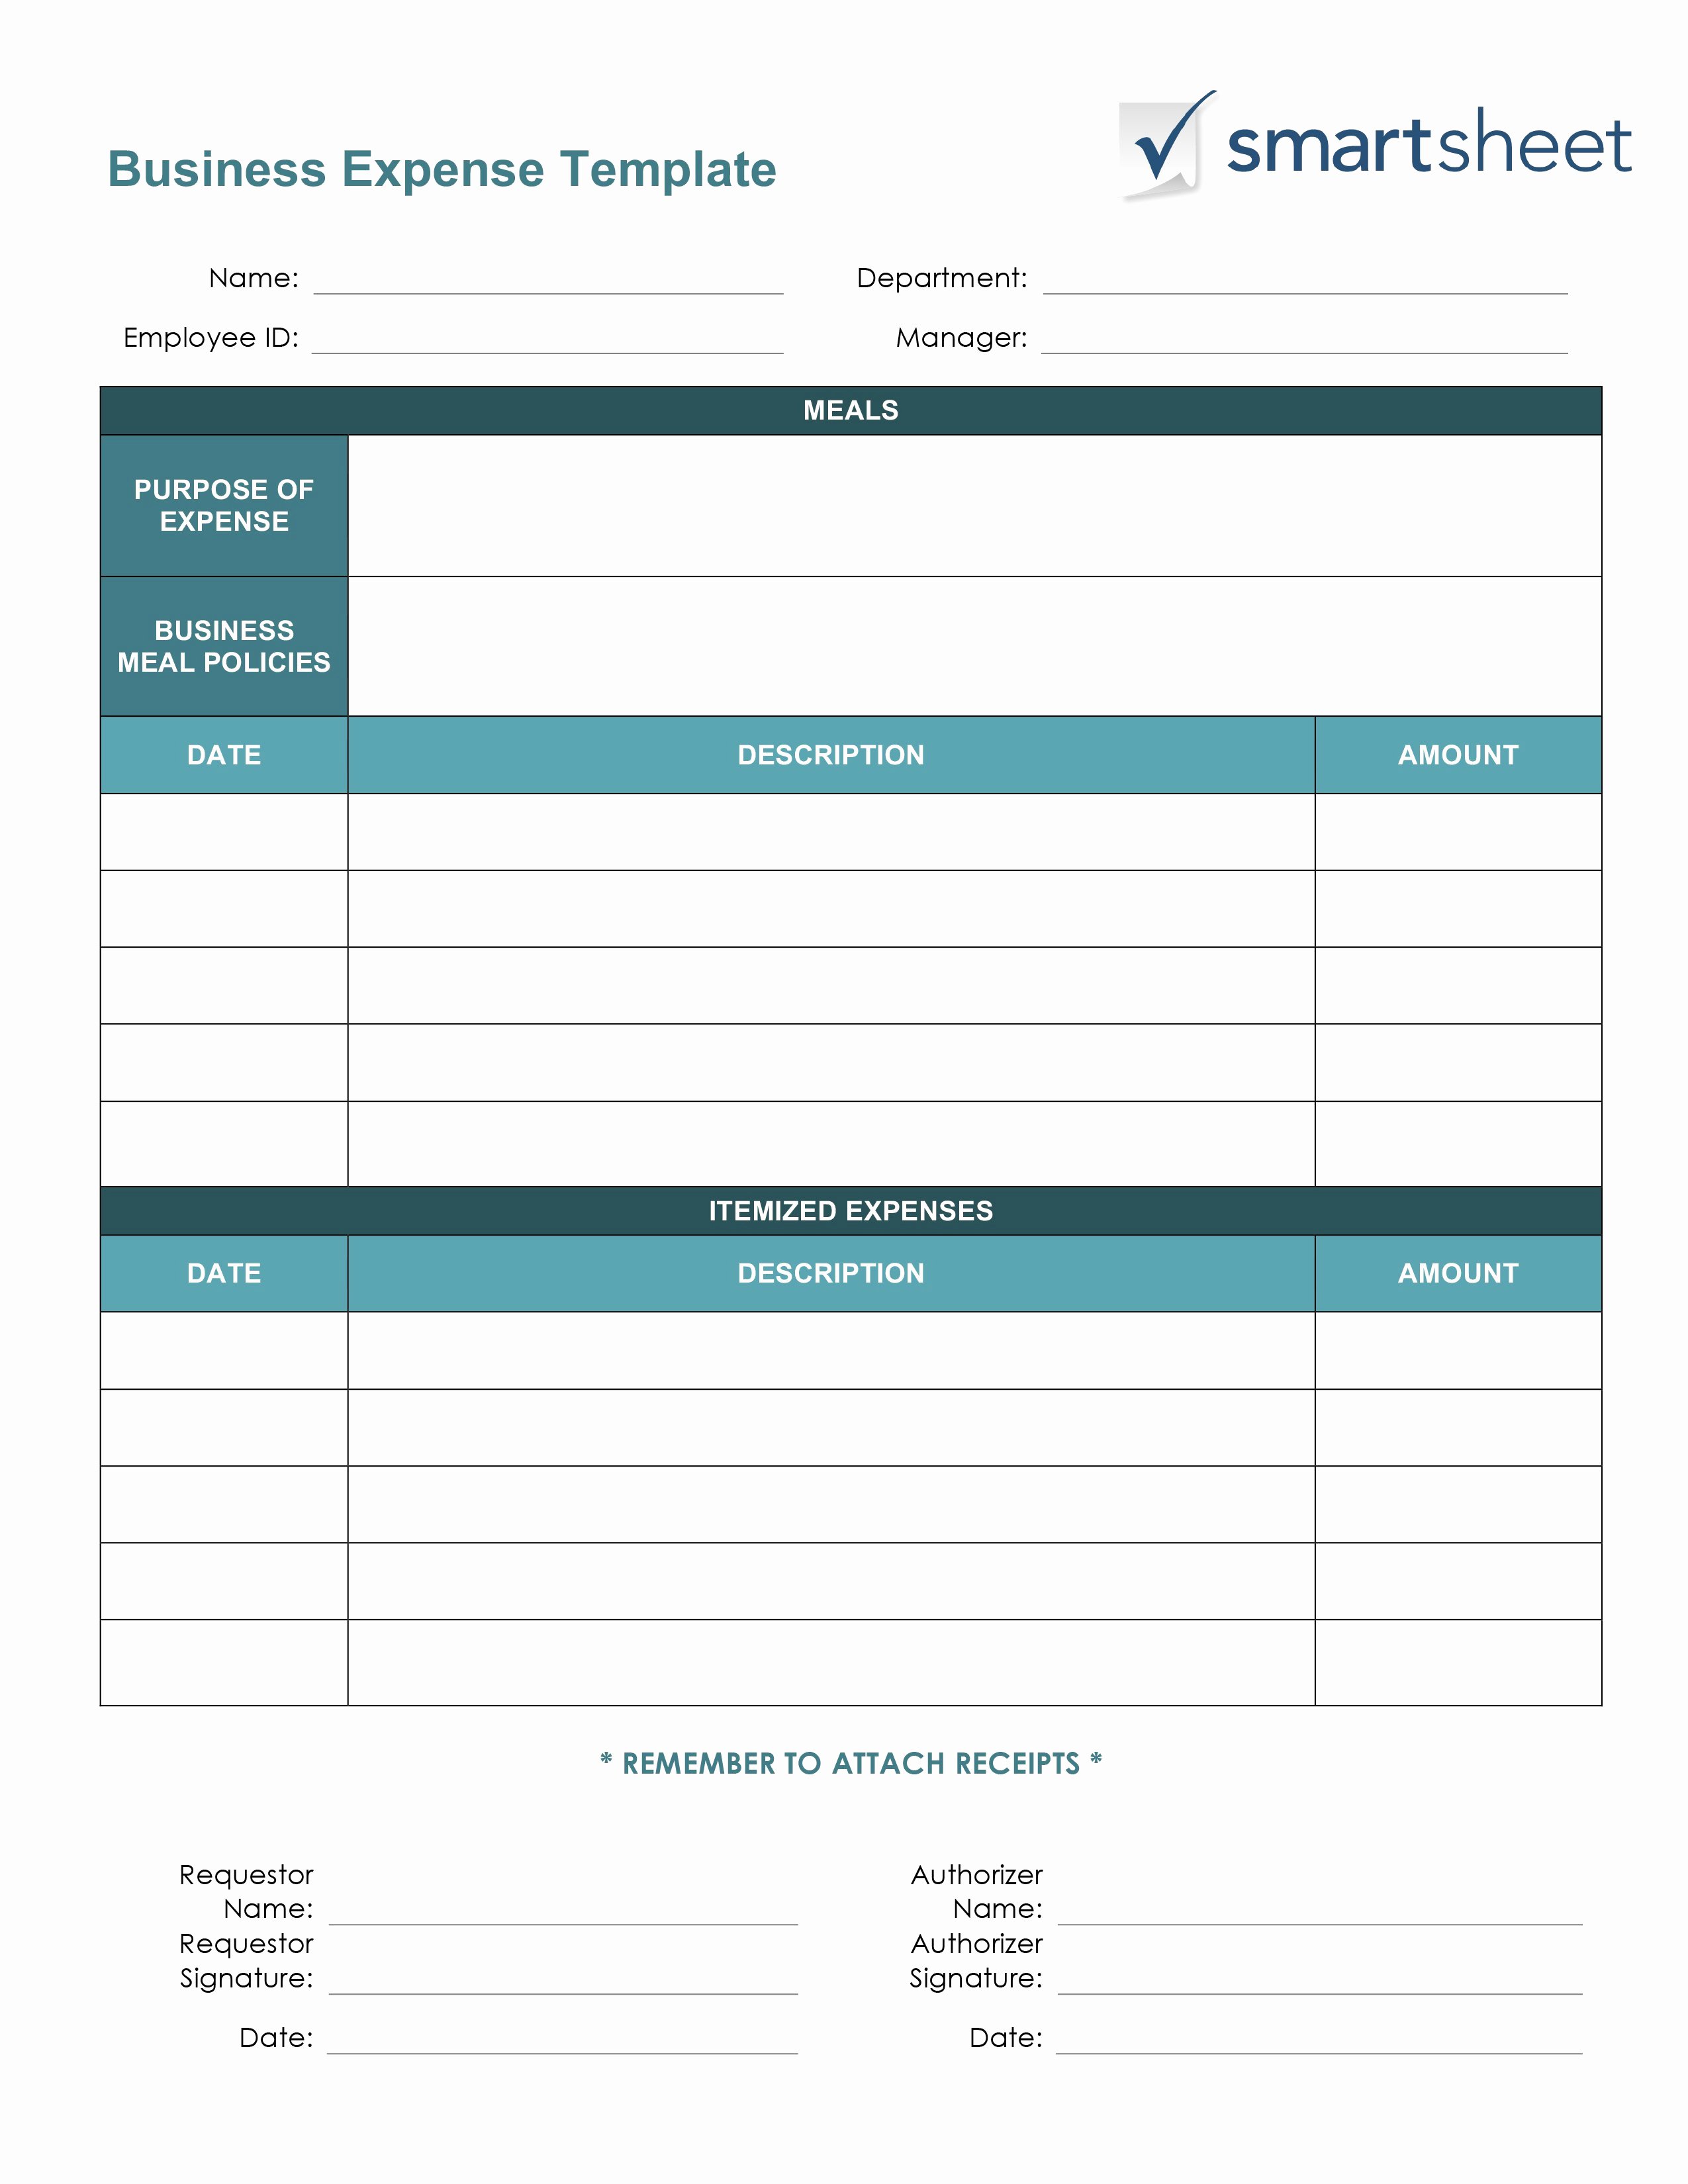 Business Trip Expenses Template Best Of Free Expense Report Templates Smartsheet